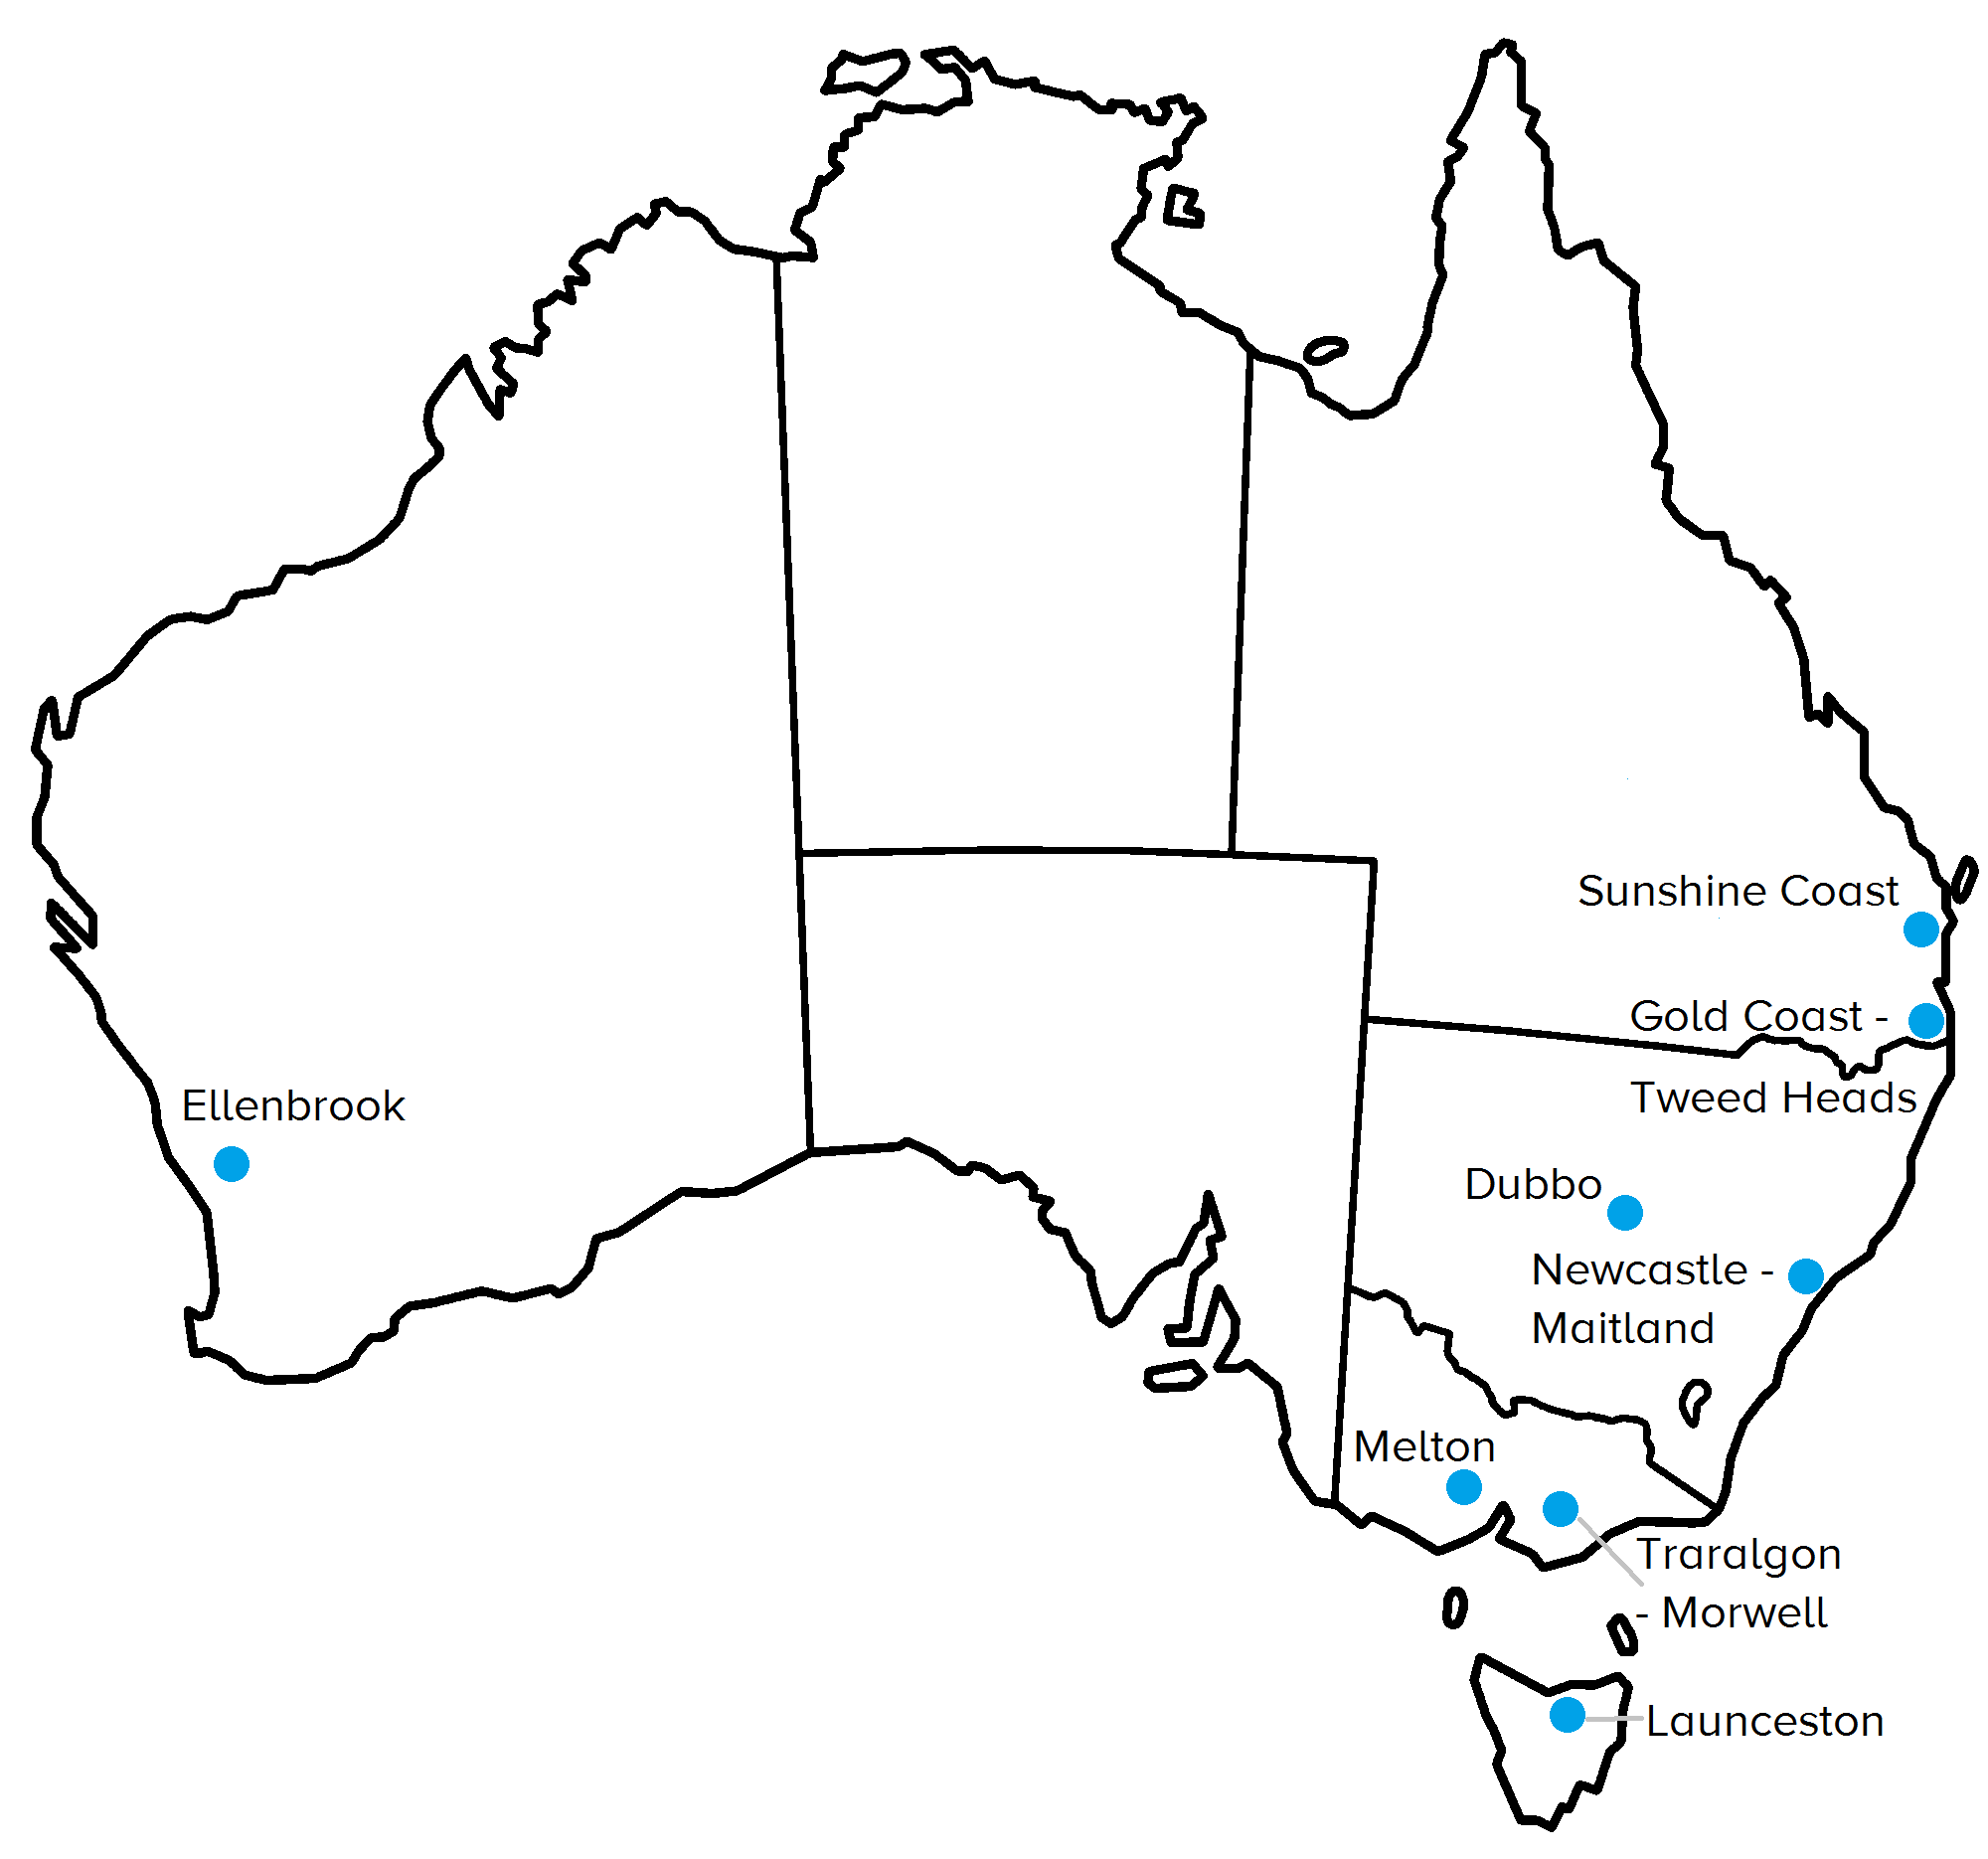 Picture of Australia highlighting places which predicted to grow